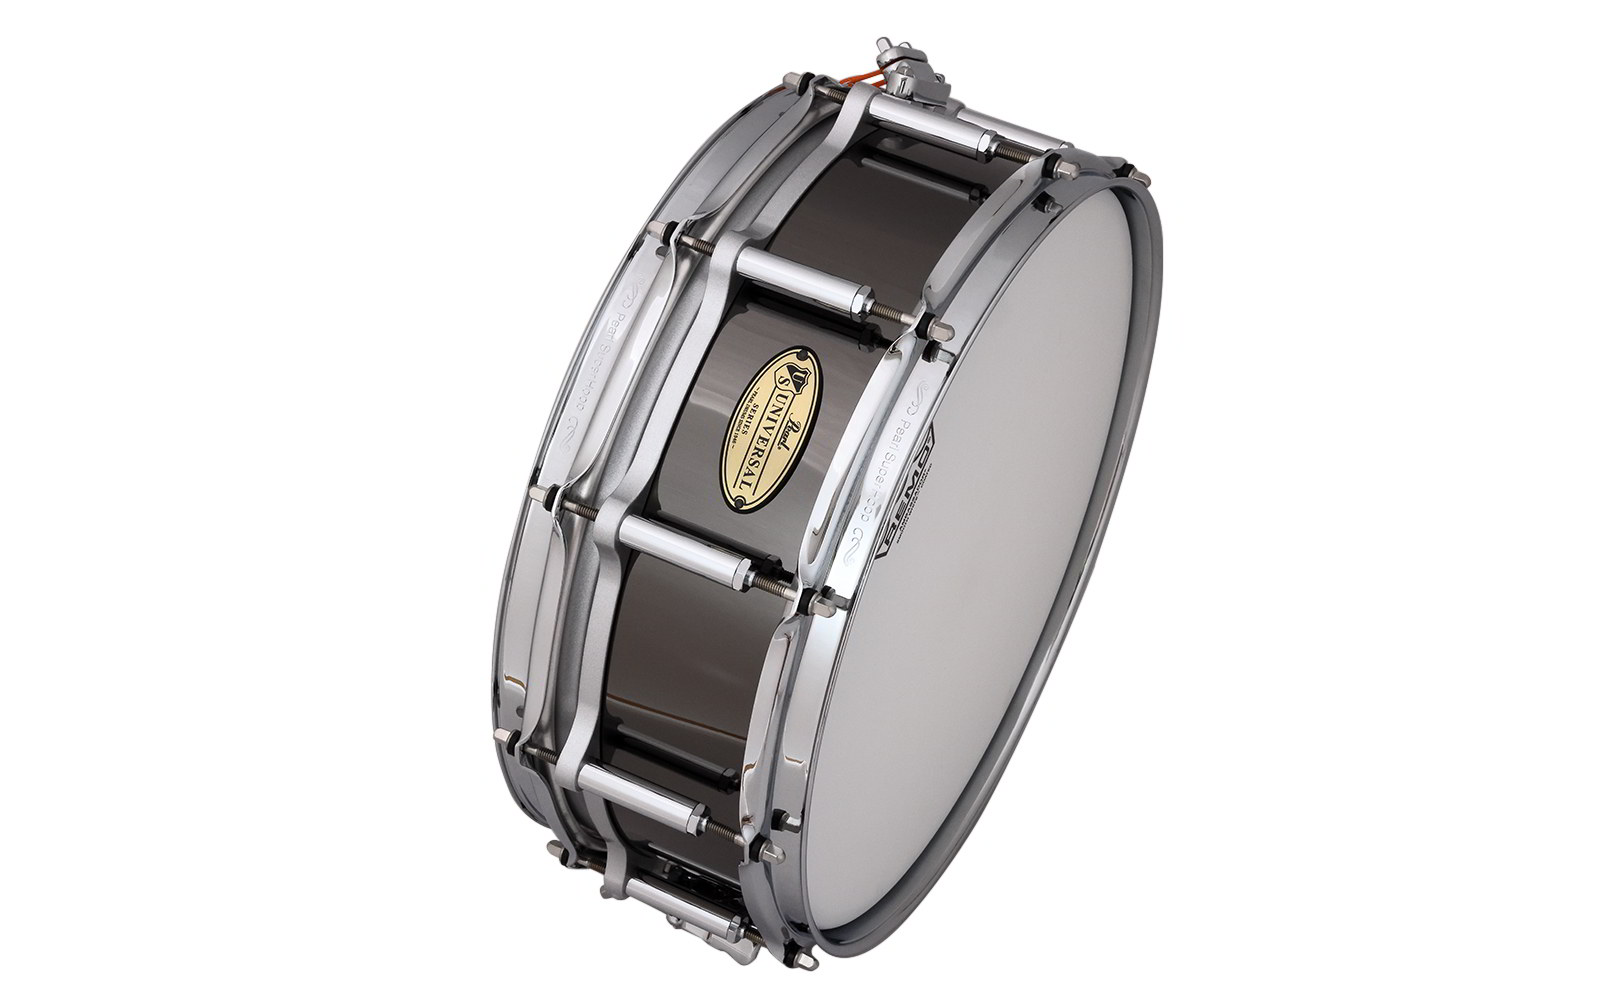 US1450F/T 14" x 5" Free Floater Snare Drum追加画像